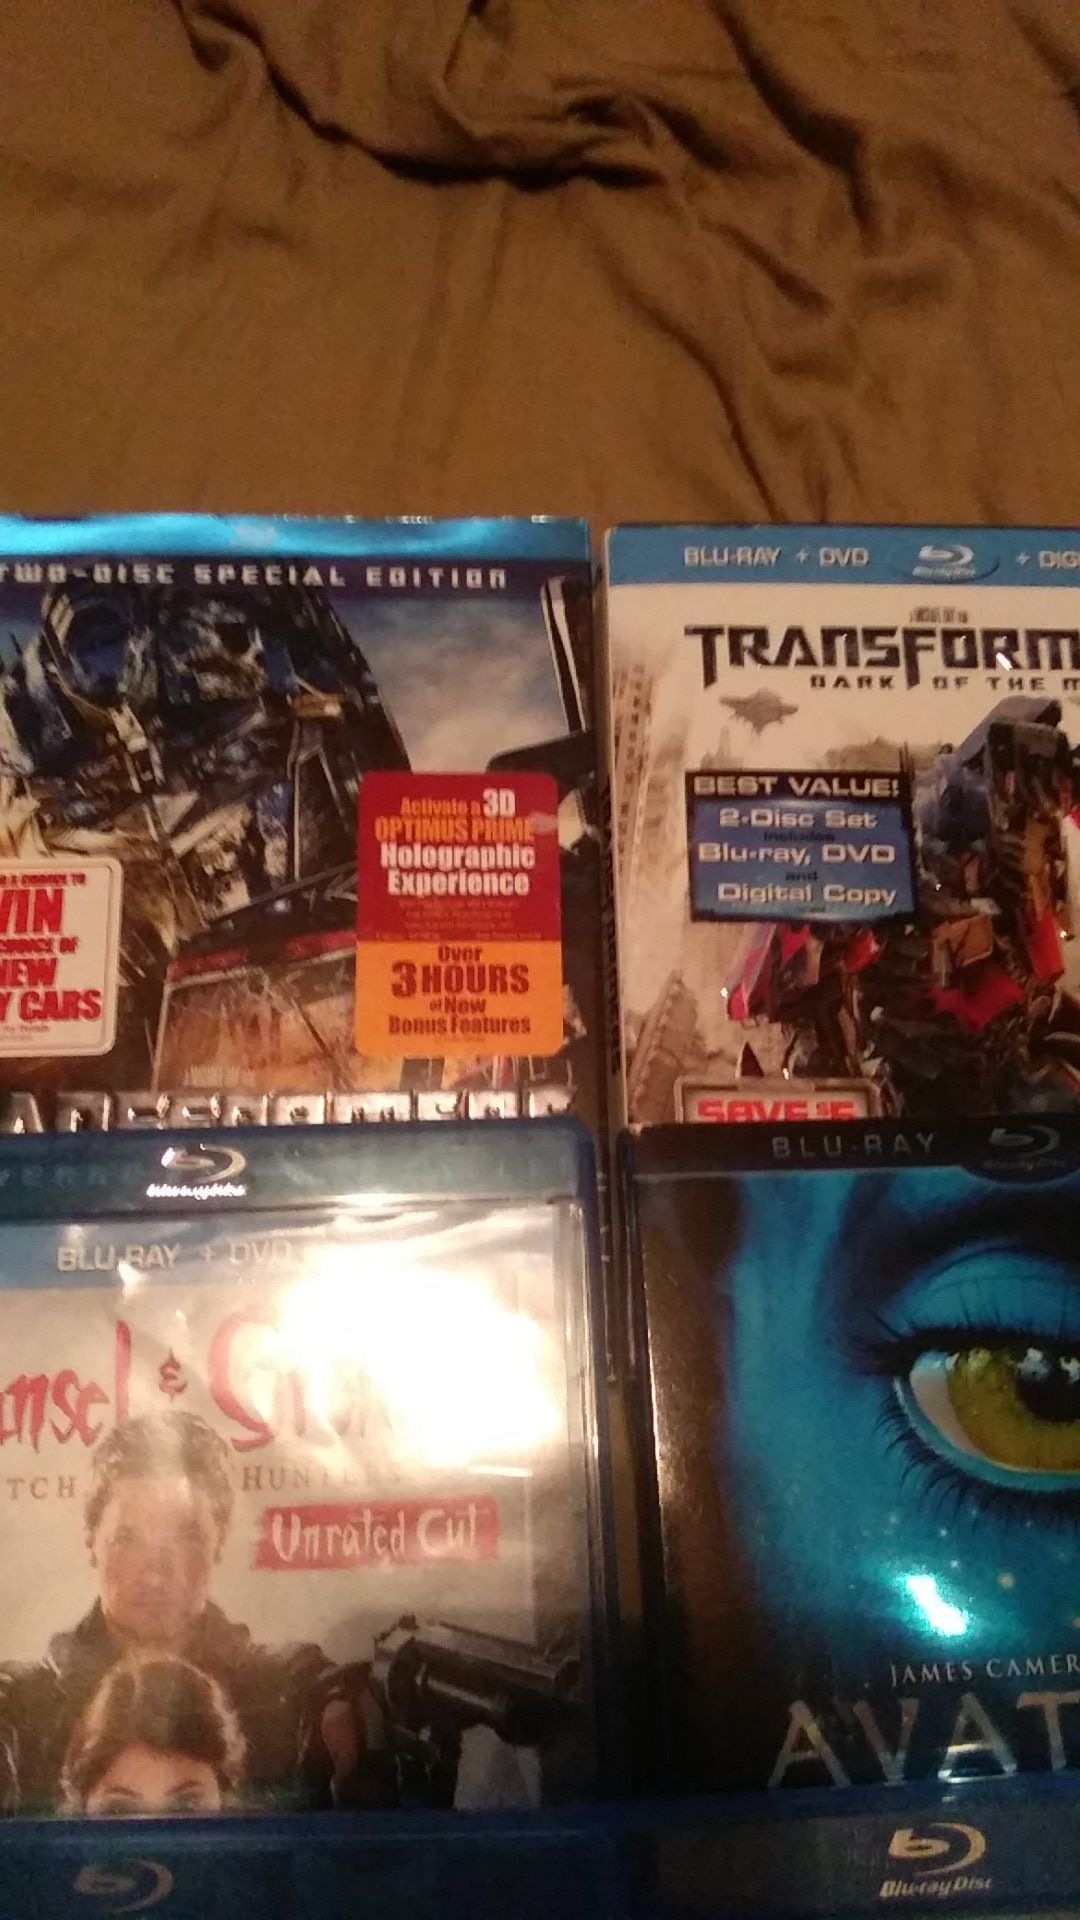 Blu-rays 3 for $10